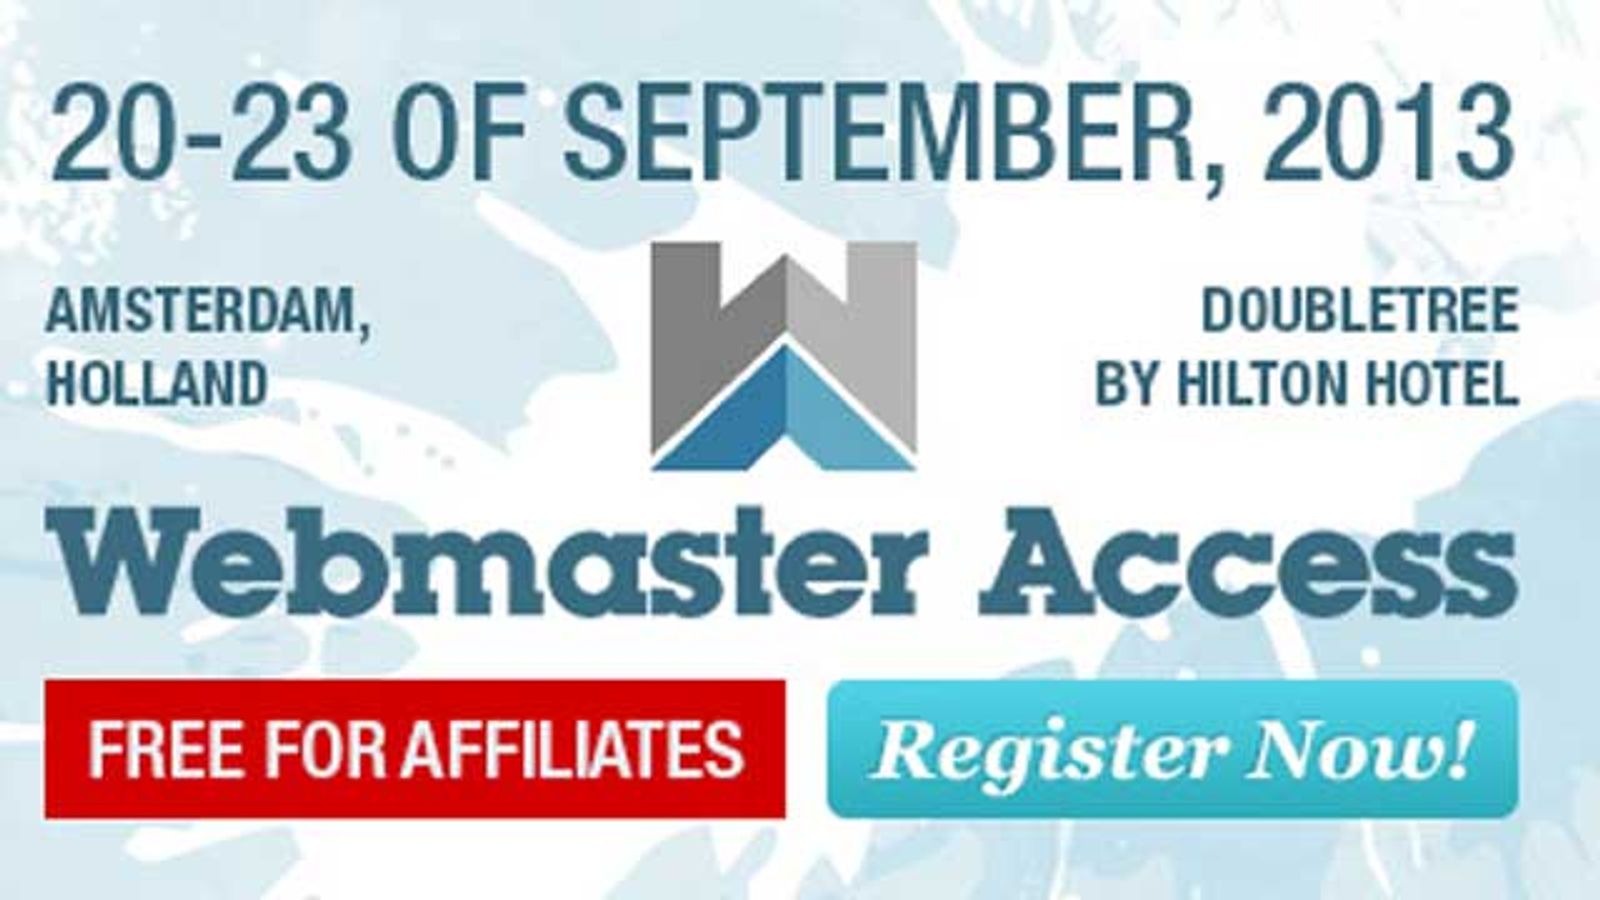 Webmaster Access 2013 Early Bird Tix on Sale; Rooms Available!